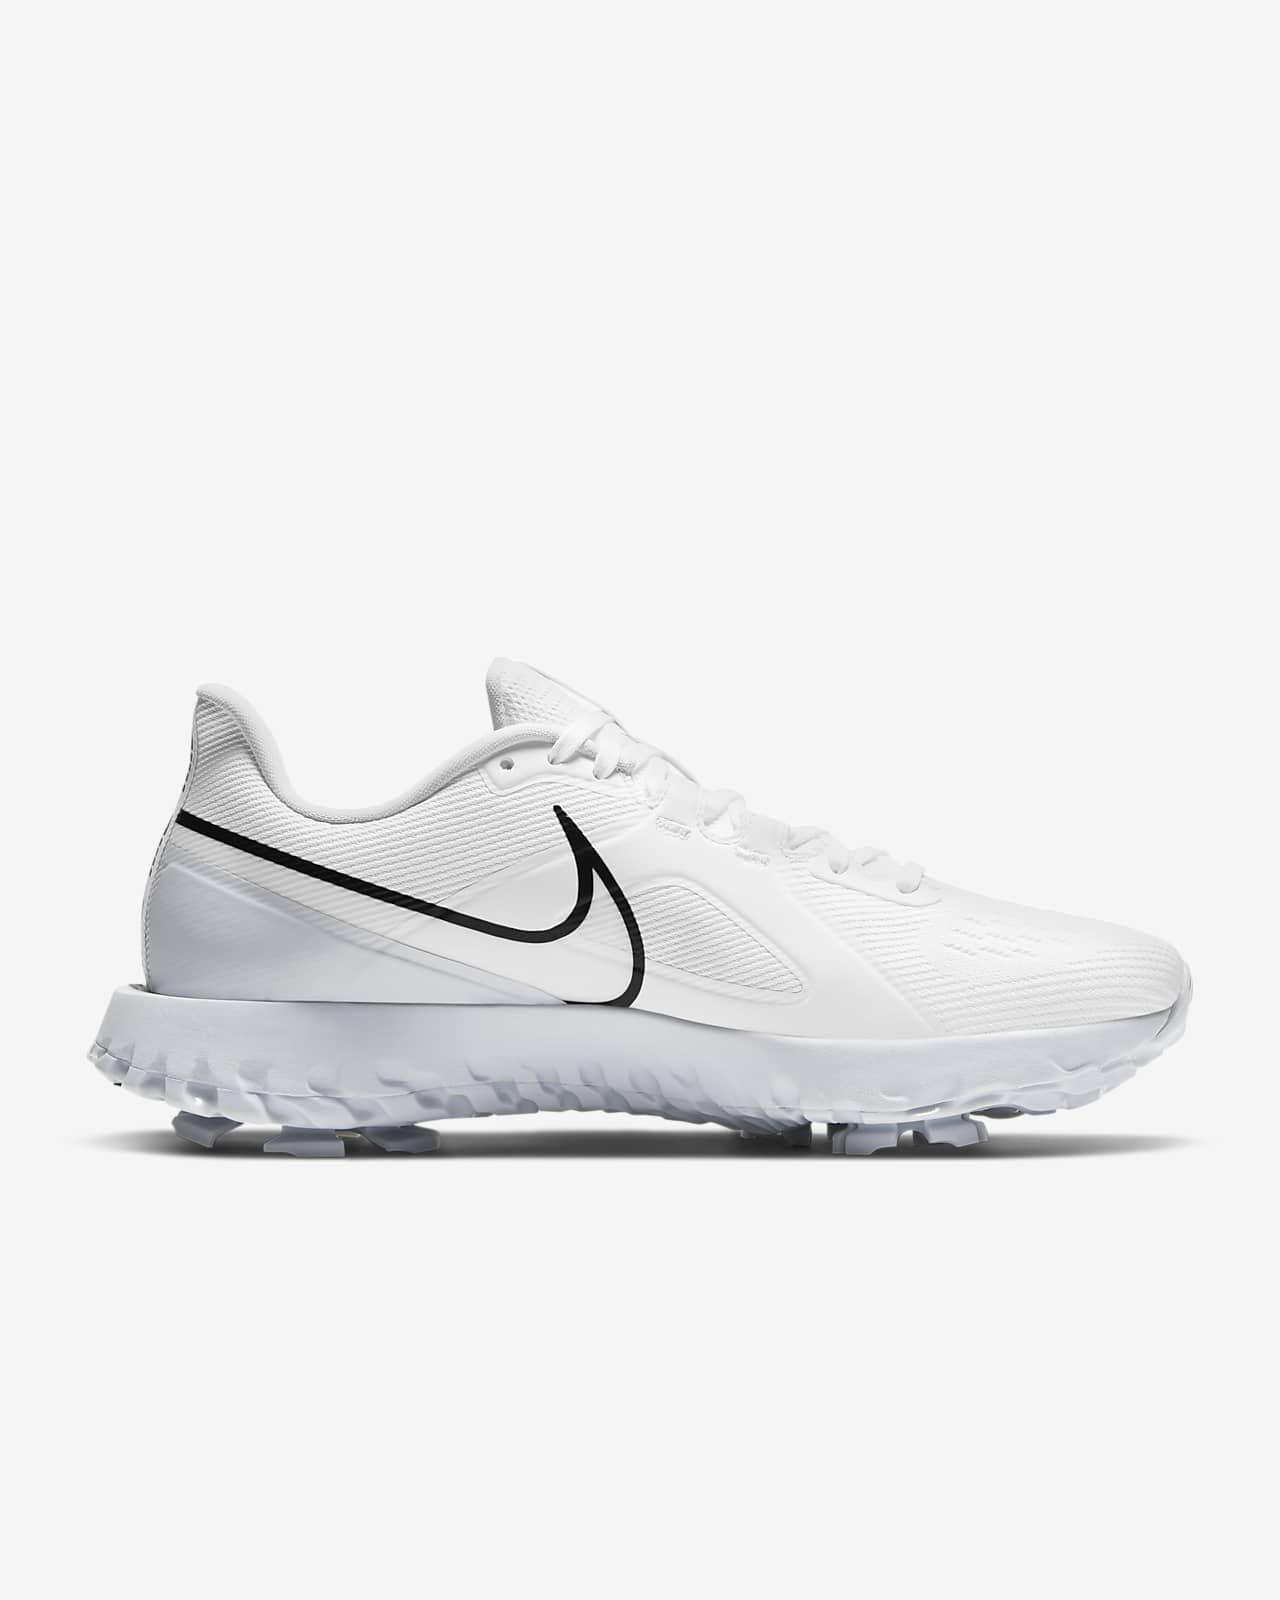 nike react infinity golf review